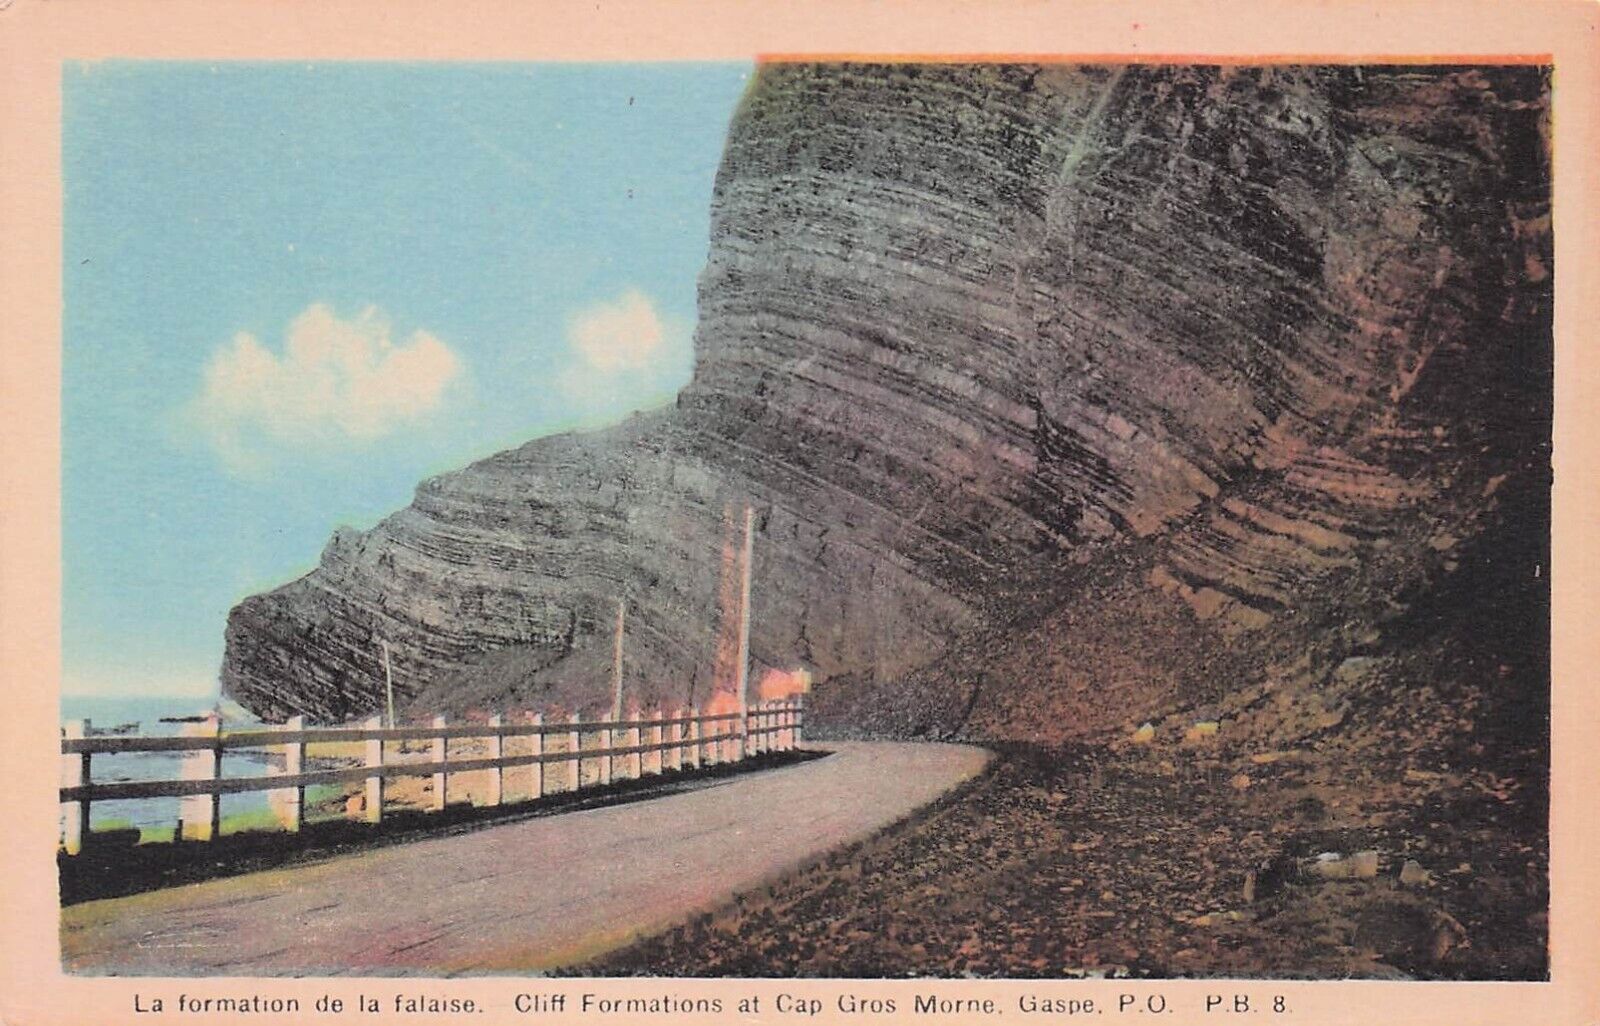 Postcard Vintage(1) CAN, Gaspe, PQ Cliff Formations/Cap Gros Morne P.B.8 UP (489